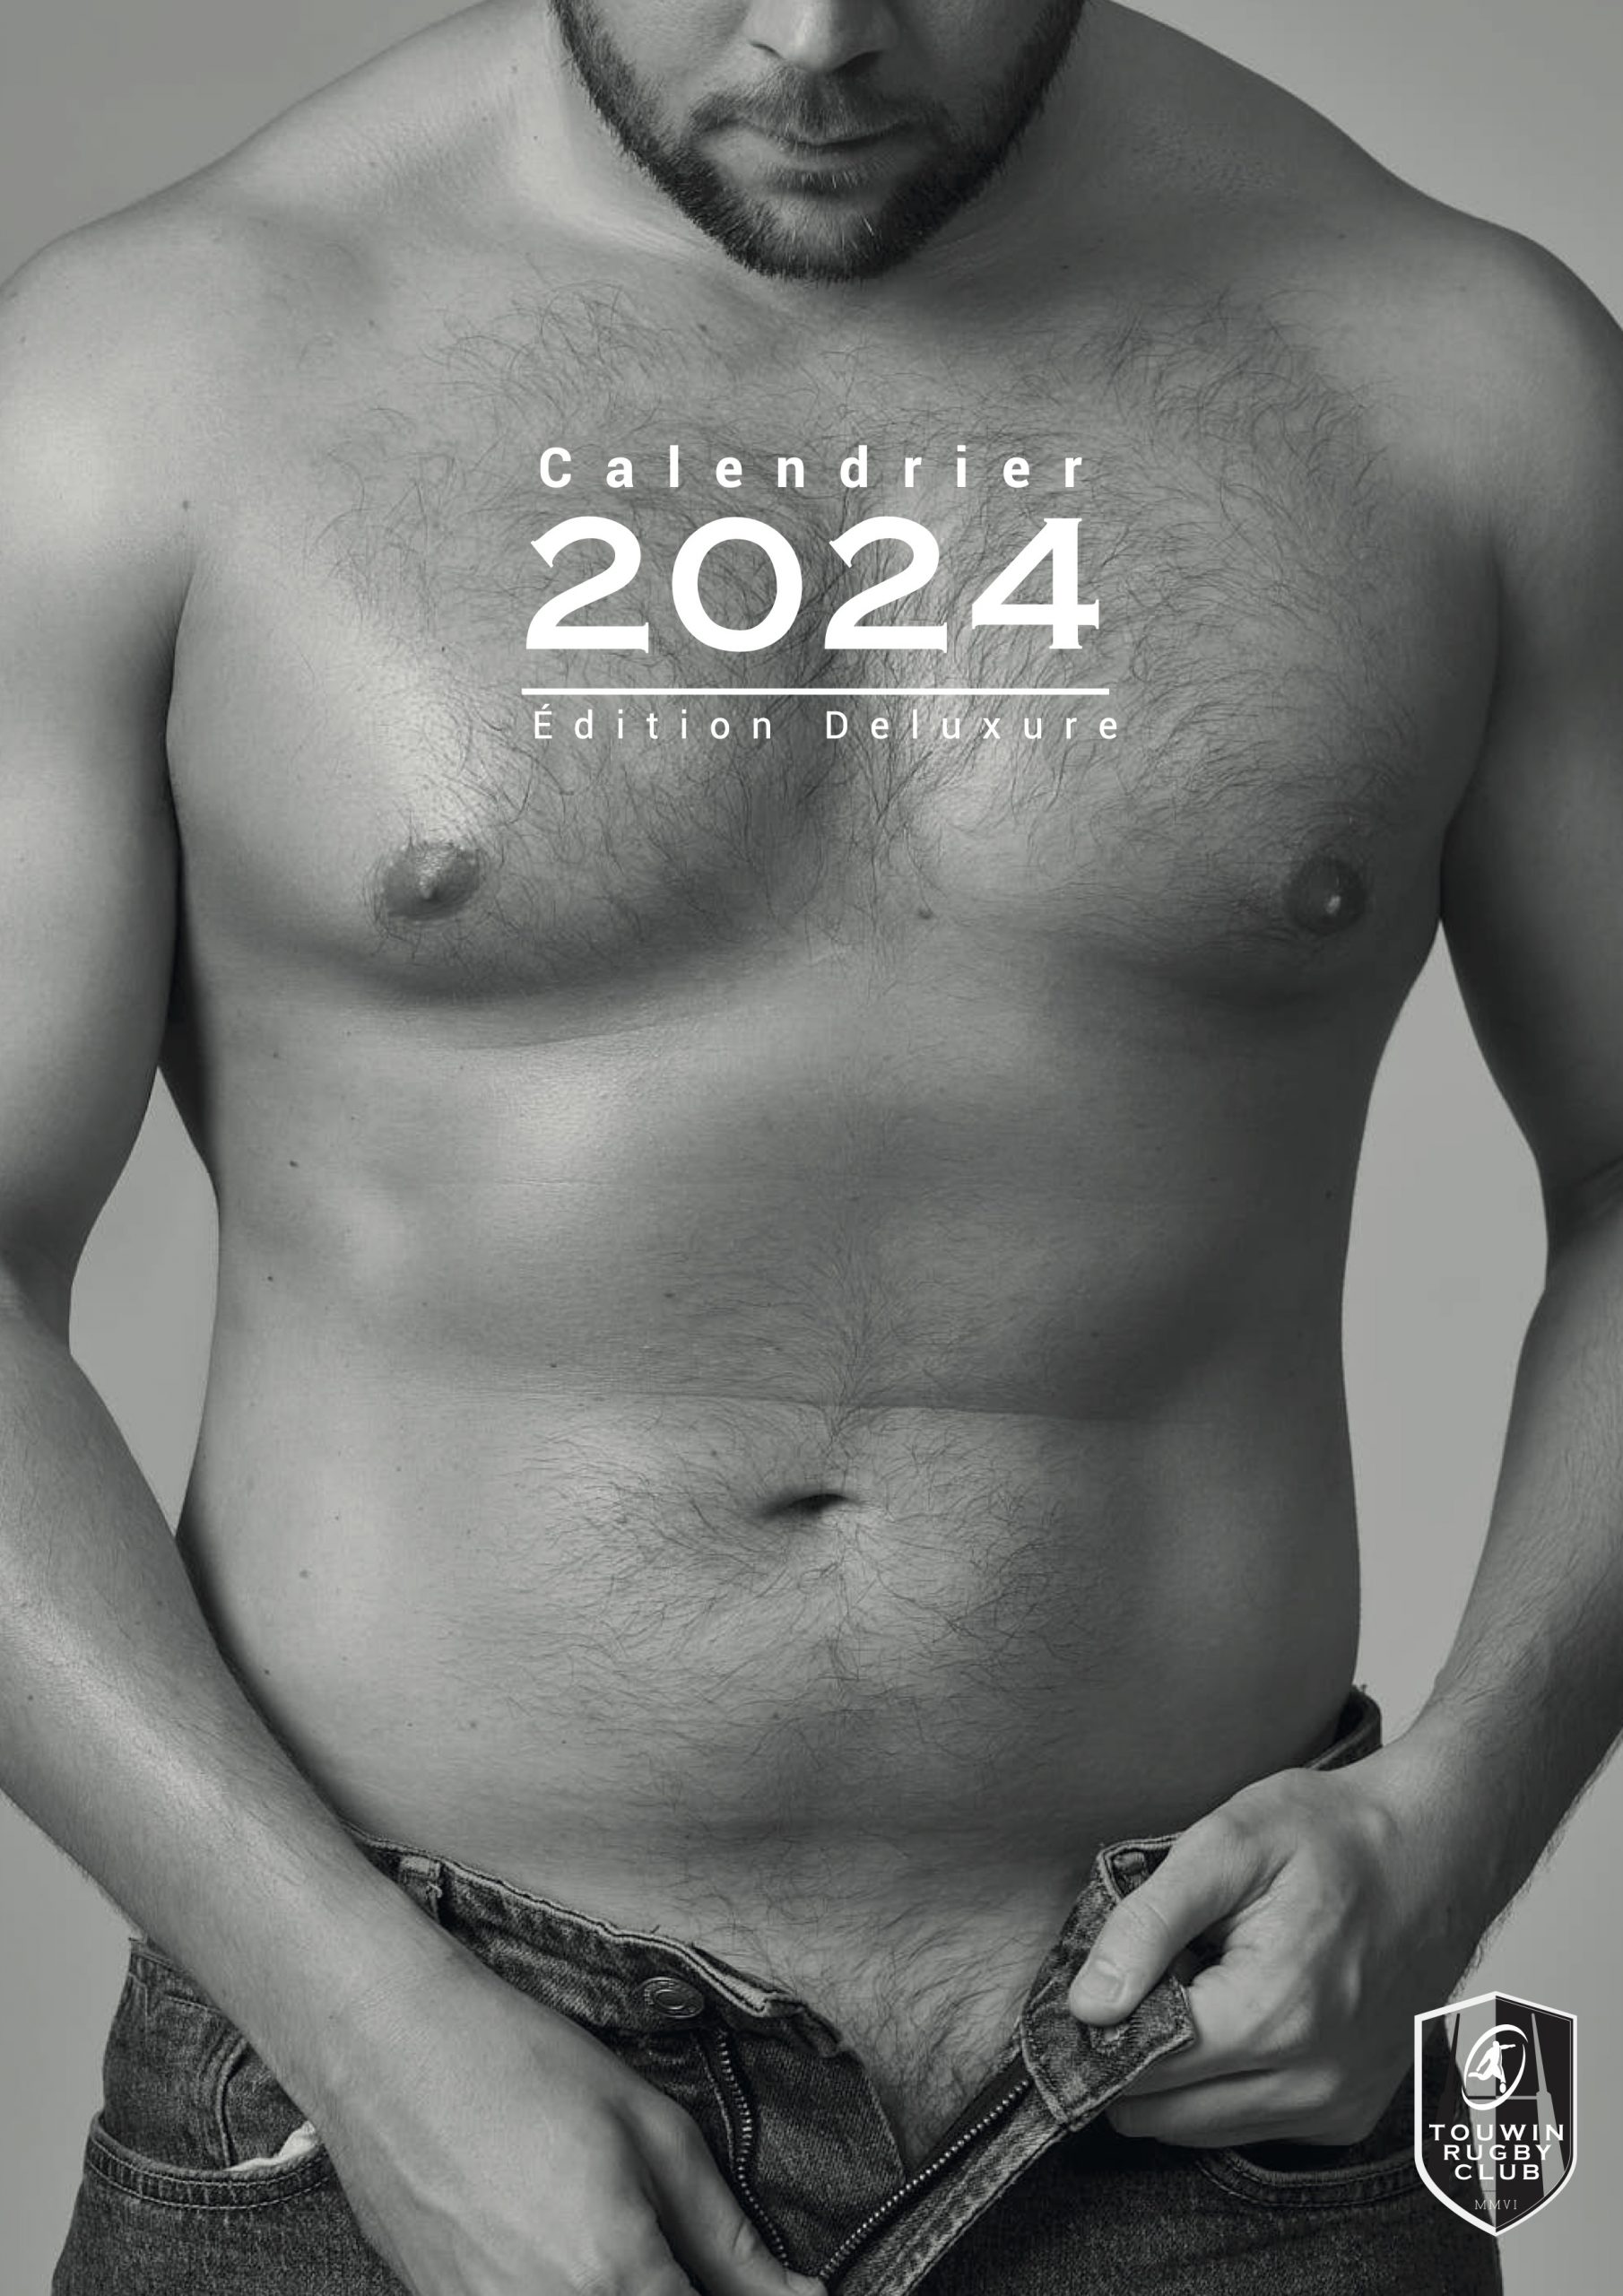 Calendrier Tou'win 2024 – Édition Deluxure – Touwin Rugby Club